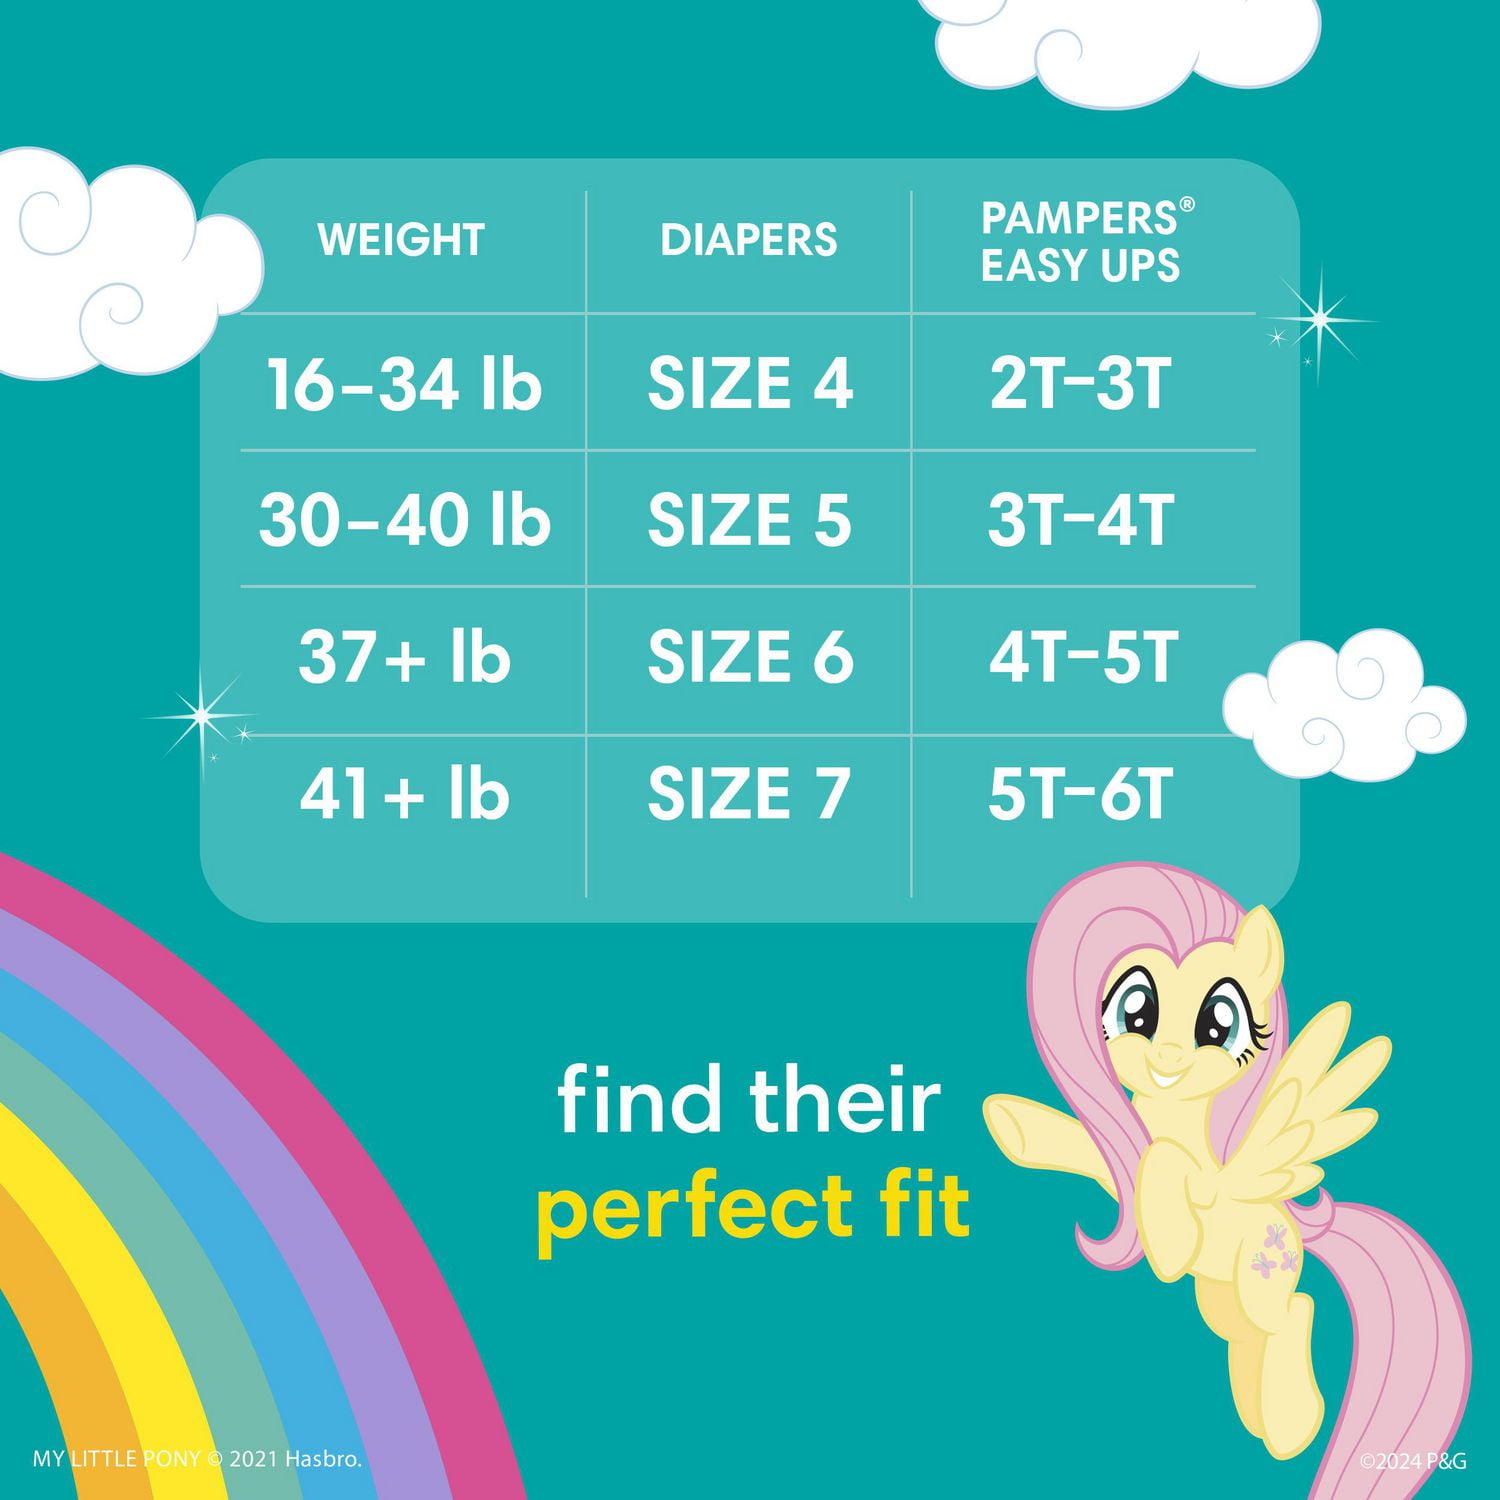 Pampers Easy Ups Training Underwear for Girls (Size 2T-3T, 74